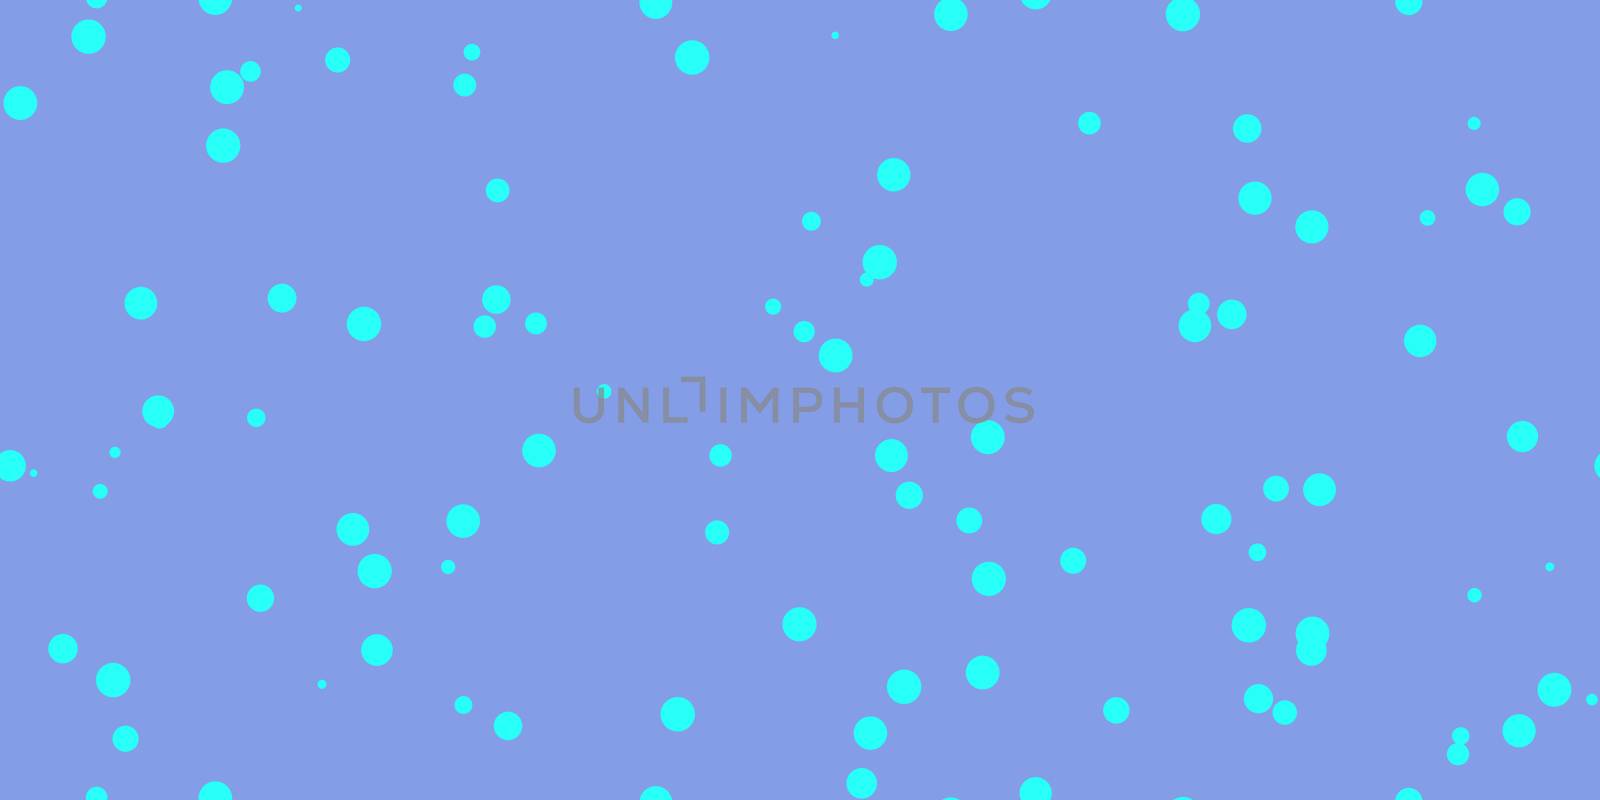 Purple Turquoise Shambolic Bubbles Backgrounds. Seamless Artistic Random Dots Texture. Chaotic Bright Dots Backdrop.